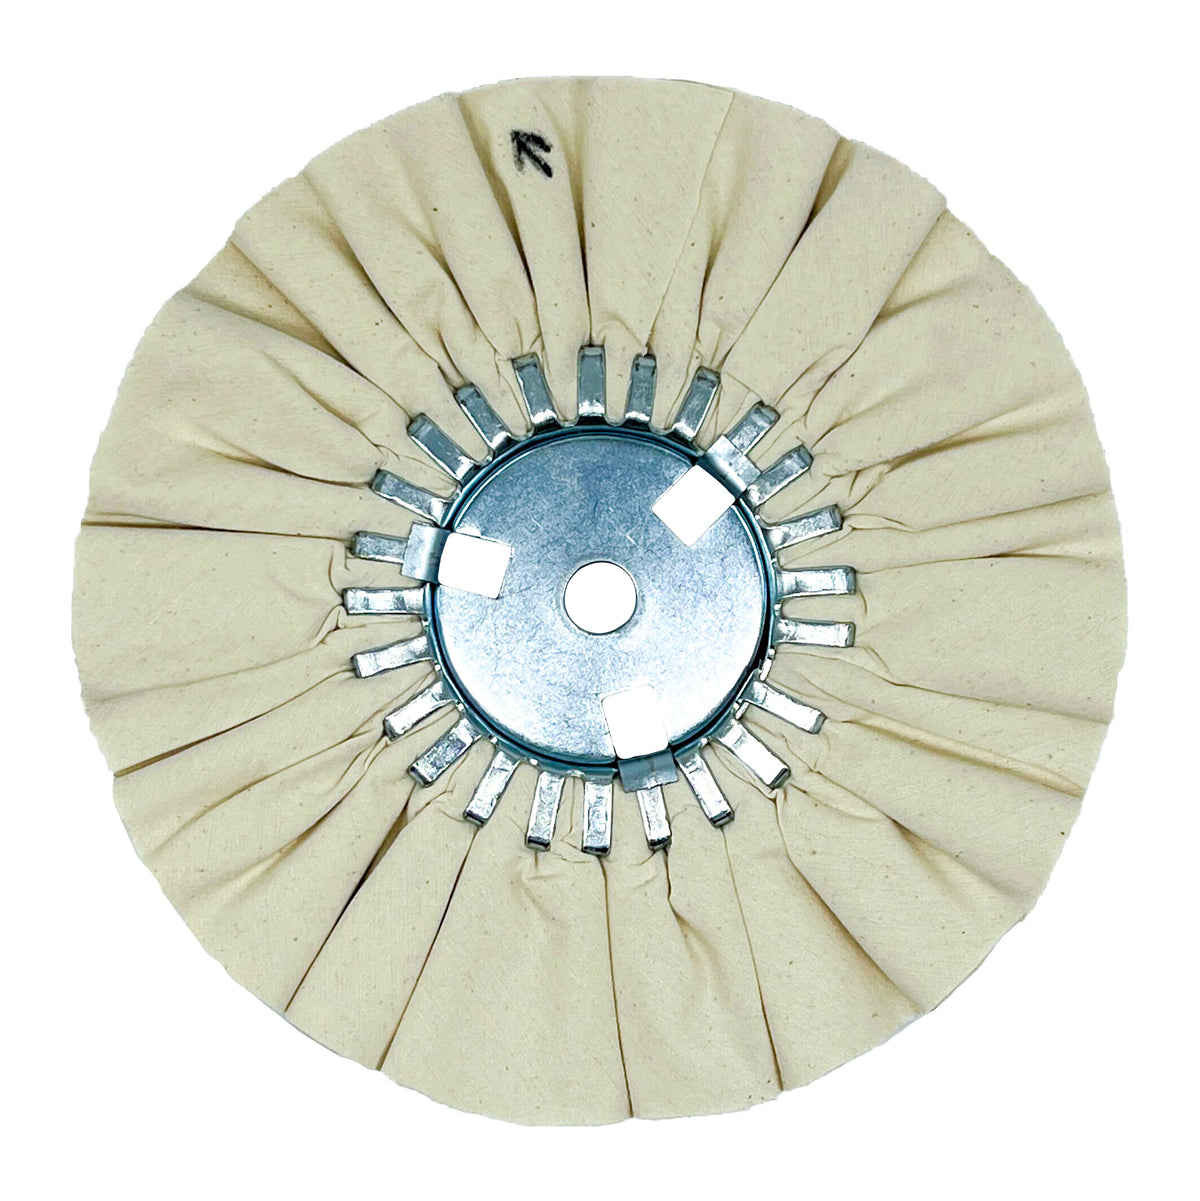 4 Metal Buffing Wheel Kit for Drill - Polishing Aluminum, Stainless S –  LINE10 Tools